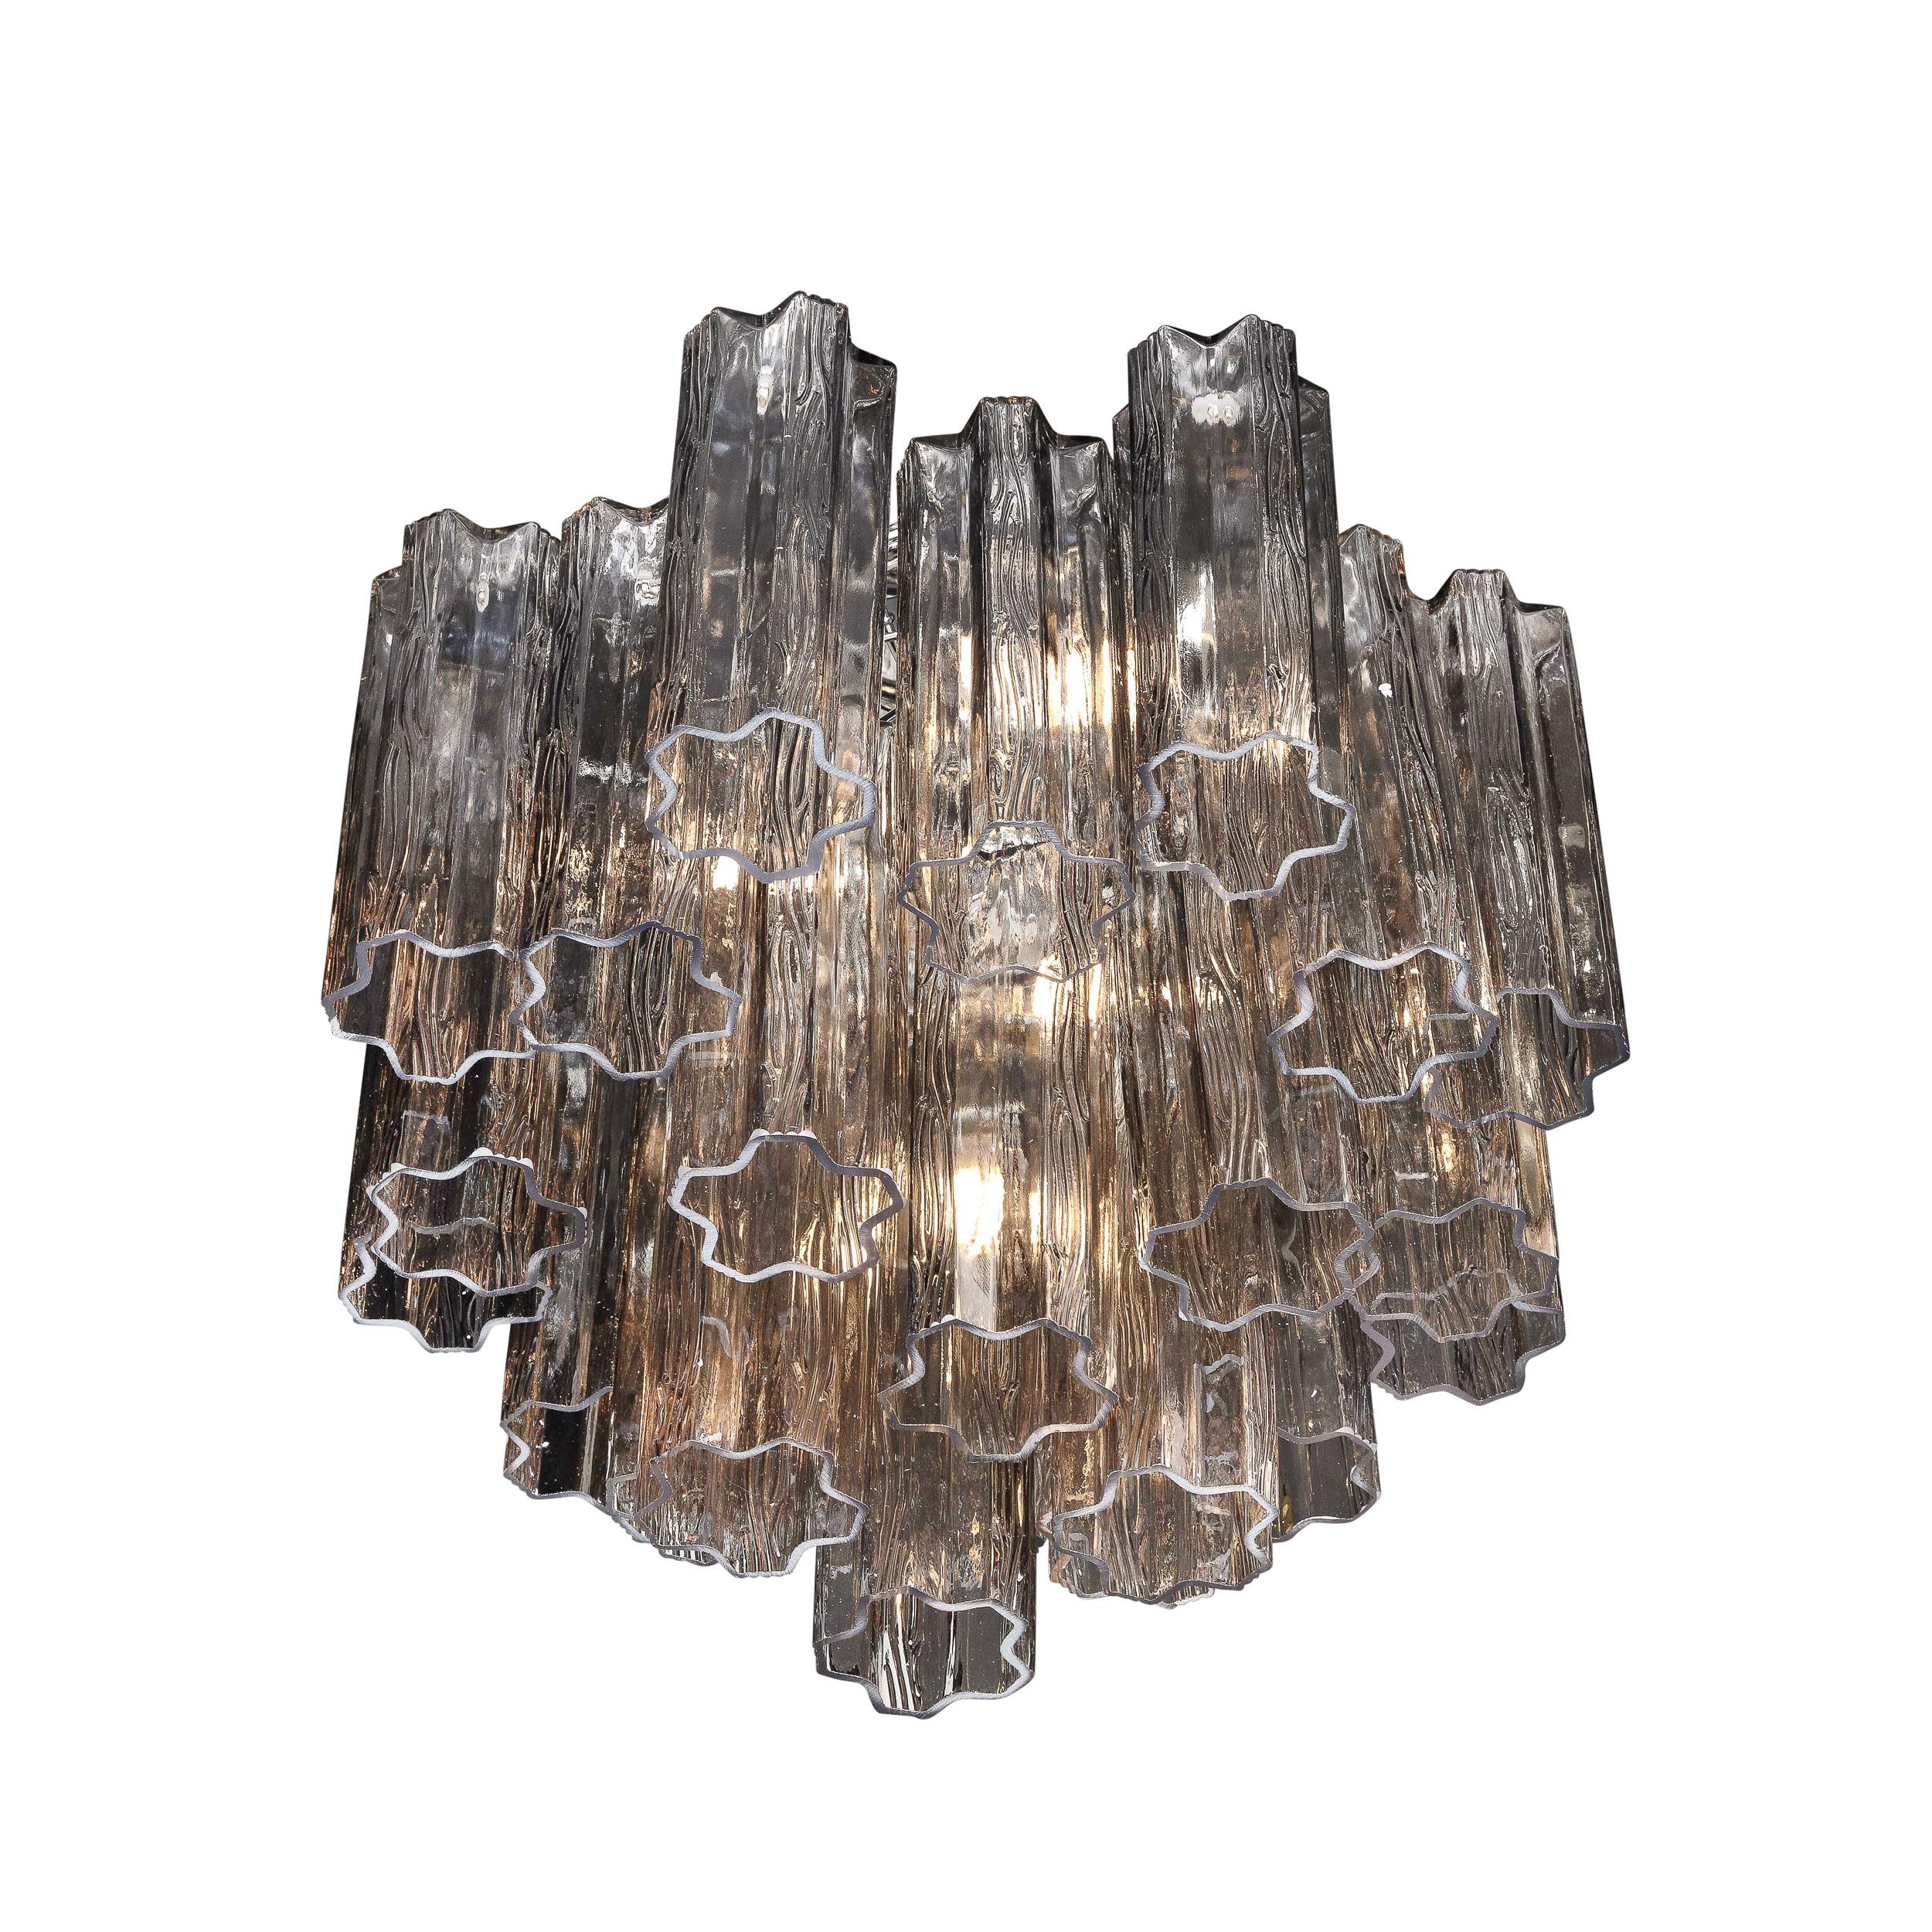 This Modernist Smoked Glass Multi-Tier Stepped Tronchi Chandelier W/Chrome Fittings originates from Italy, circa 1980. Featuring a multi-tiered stepped composition of semi translucent smoked Tronchi glass elements hanging from a chrome frame, this